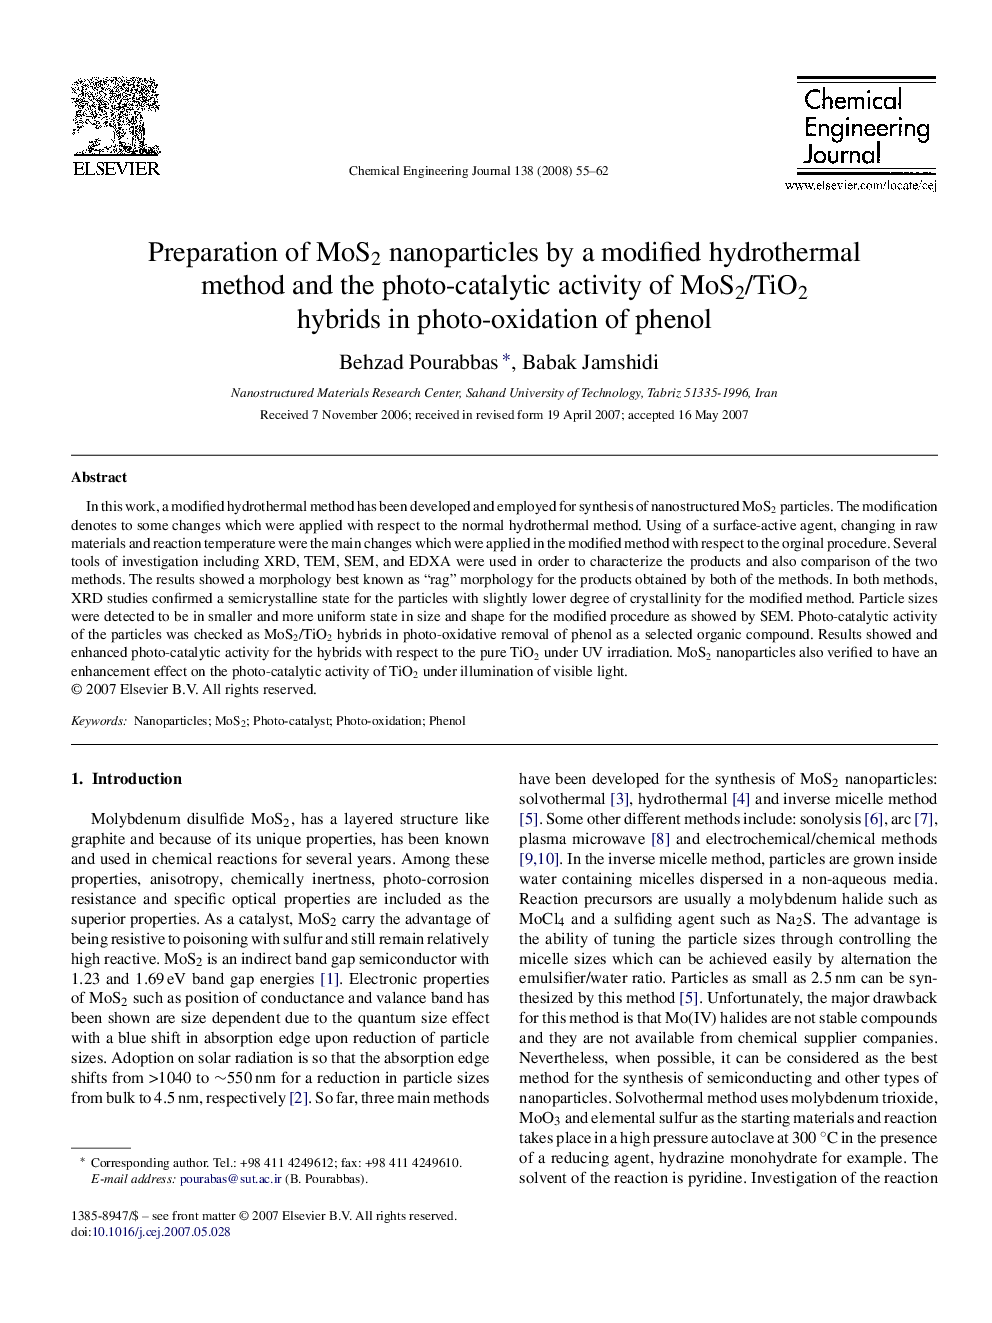 Preparation of MoS2 nanoparticles by a modified hydrothermal method and the photo-catalytic activity of MoS2/TiO2 hybrids in photo-oxidation of phenol